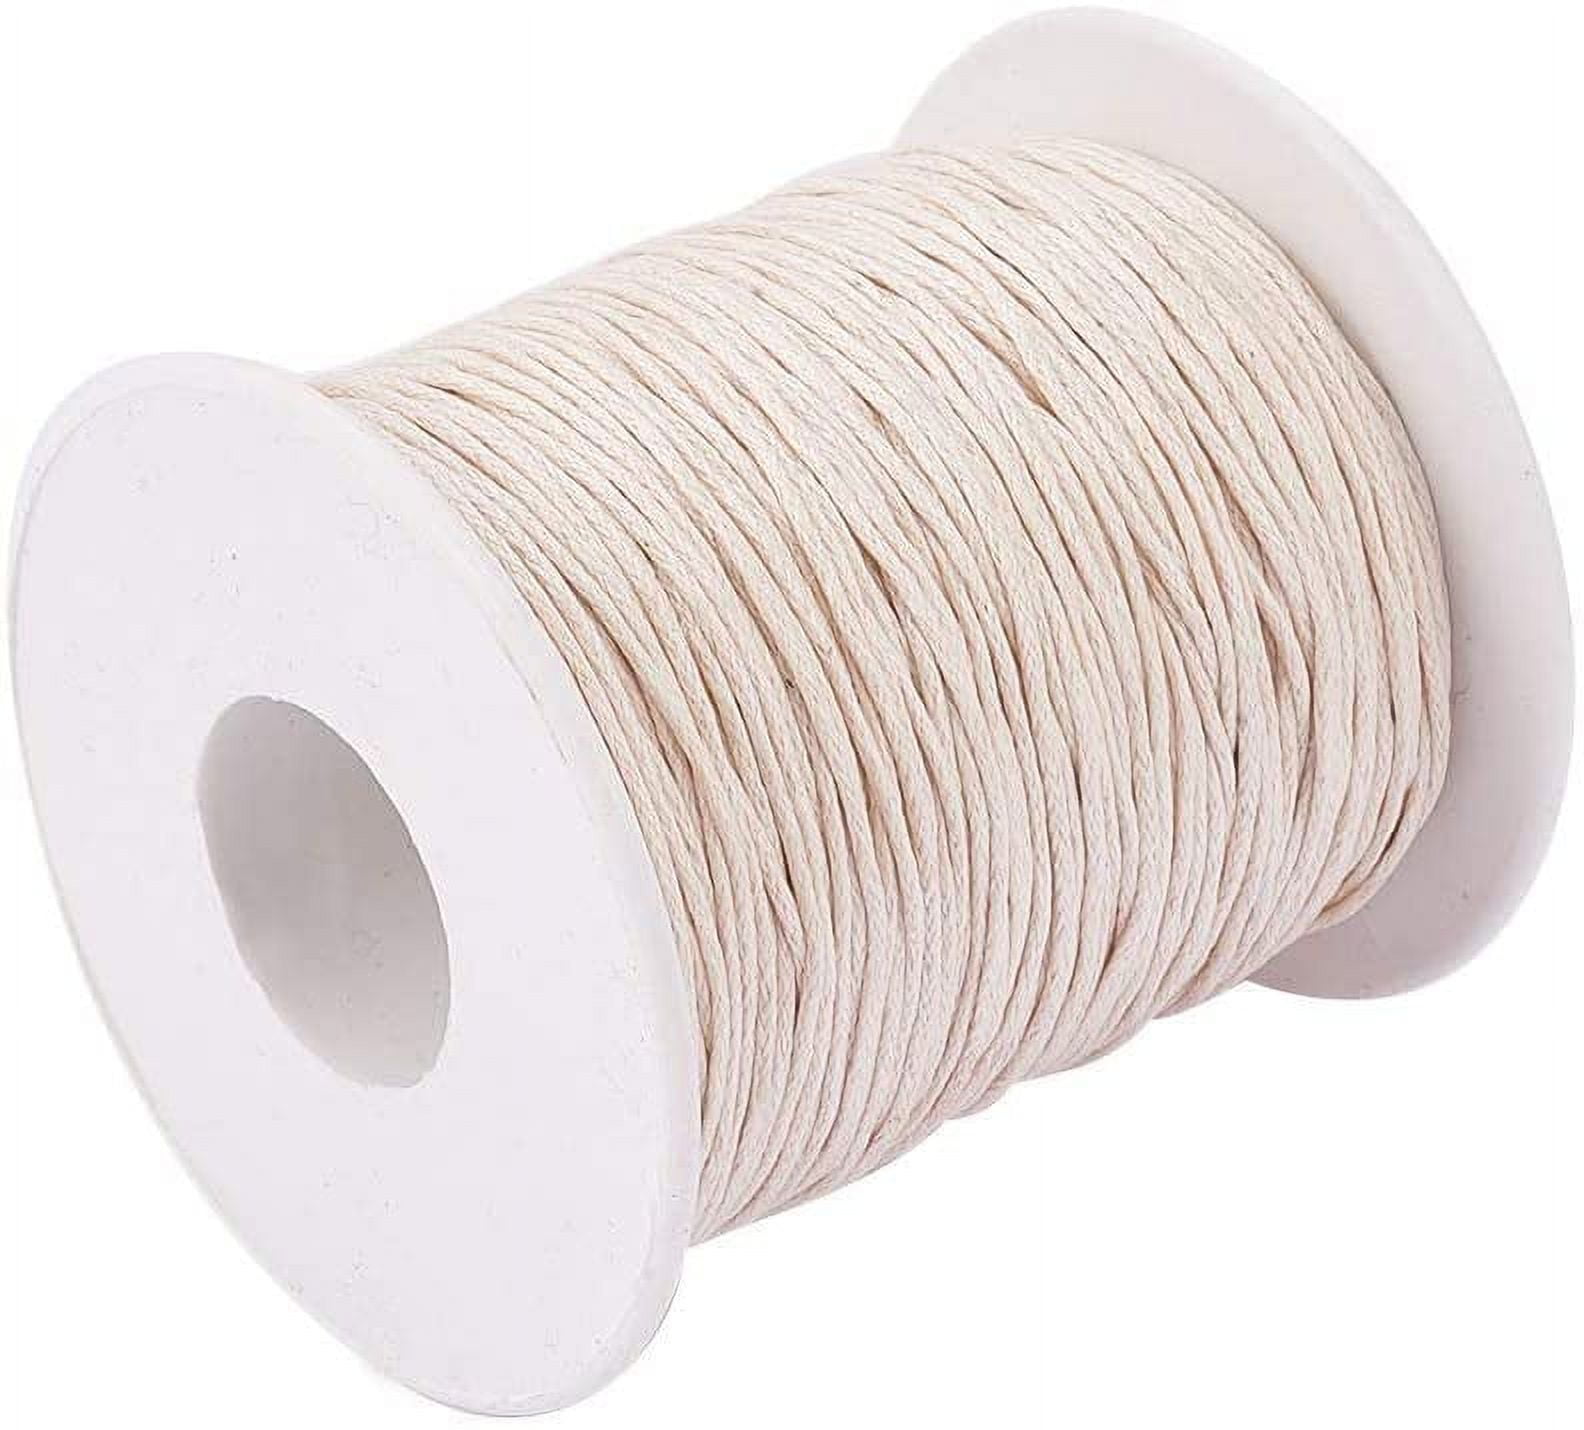 100 Yards Waxed Cord Cotton Waxed Cotton Thread 1mm Waxed Beading String  Cord for Jewelry Bracelet Making Macrame Crafting DIY Leather - Light